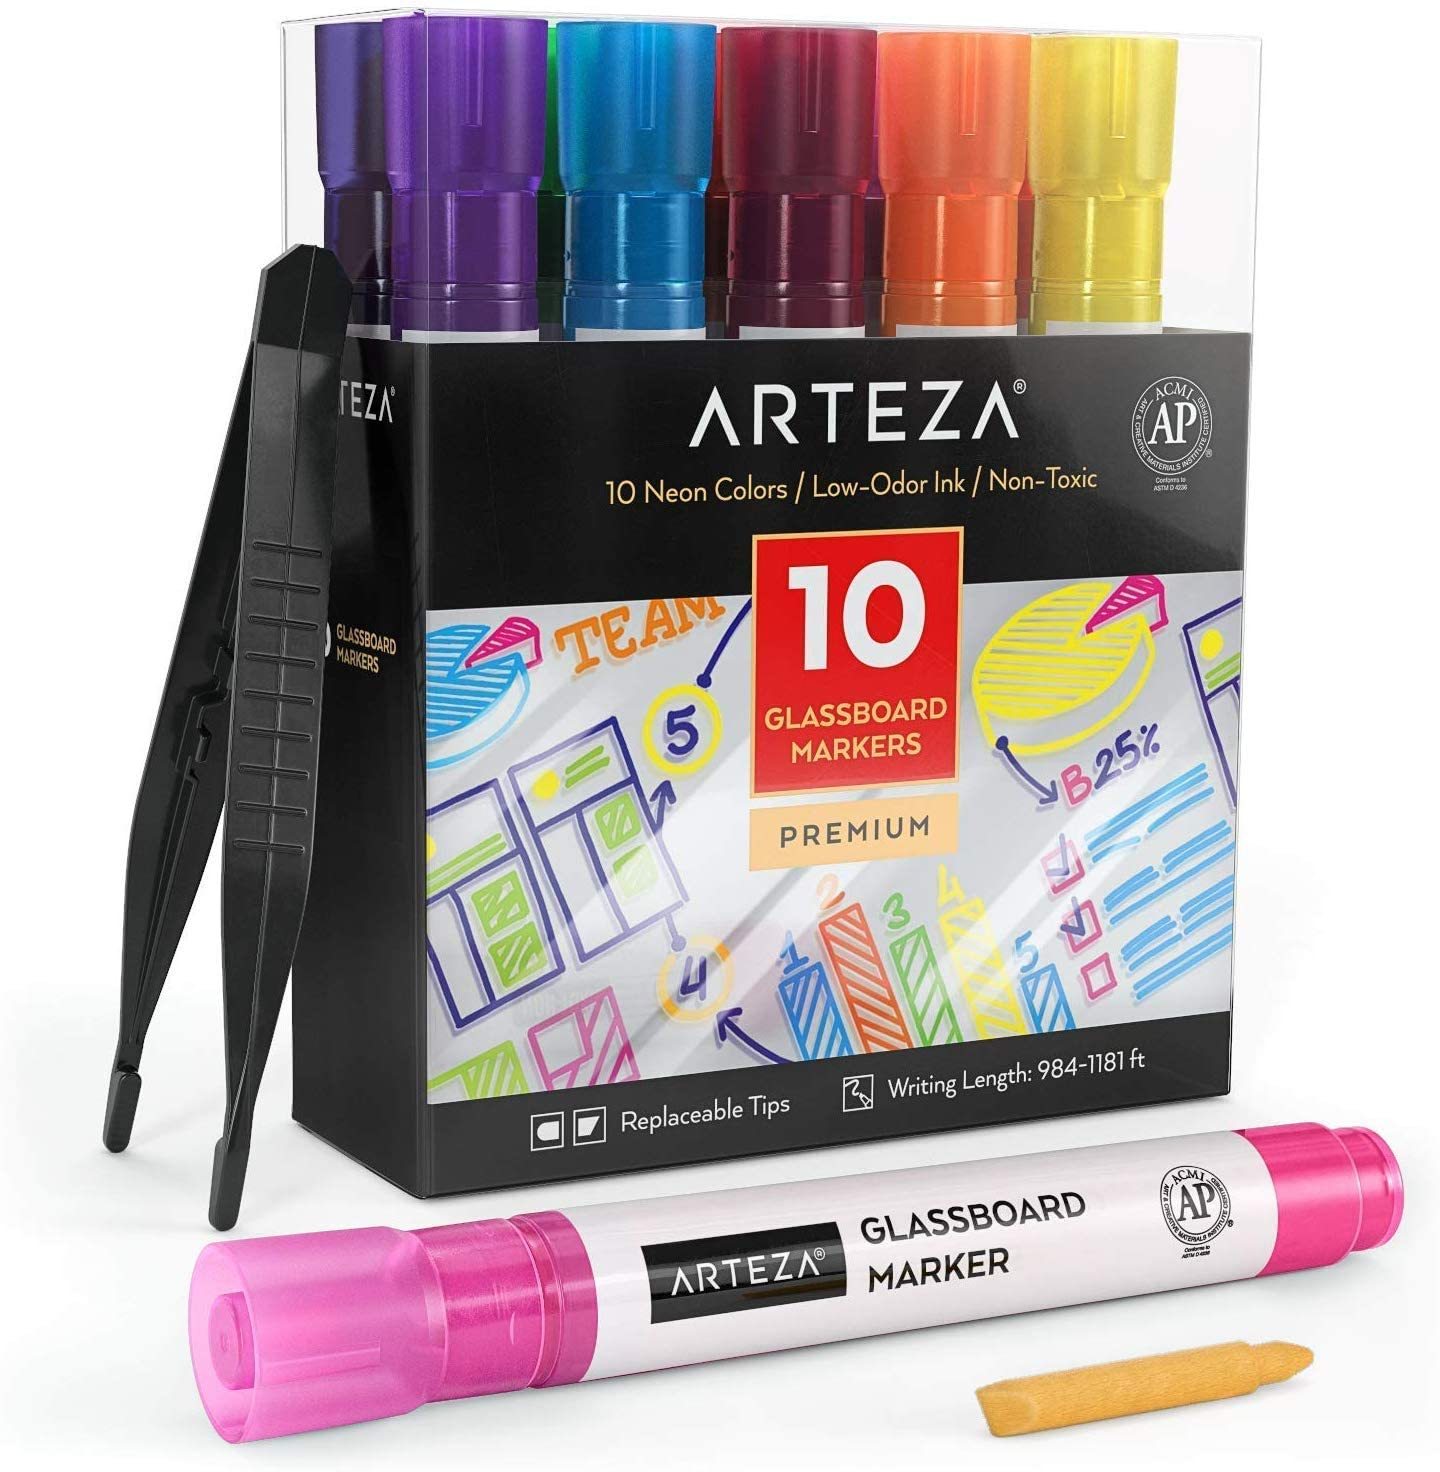 Arteza Washable Glass Board Markers Set, Assorted Neon Colors, Non-Toxic -  10 Pack